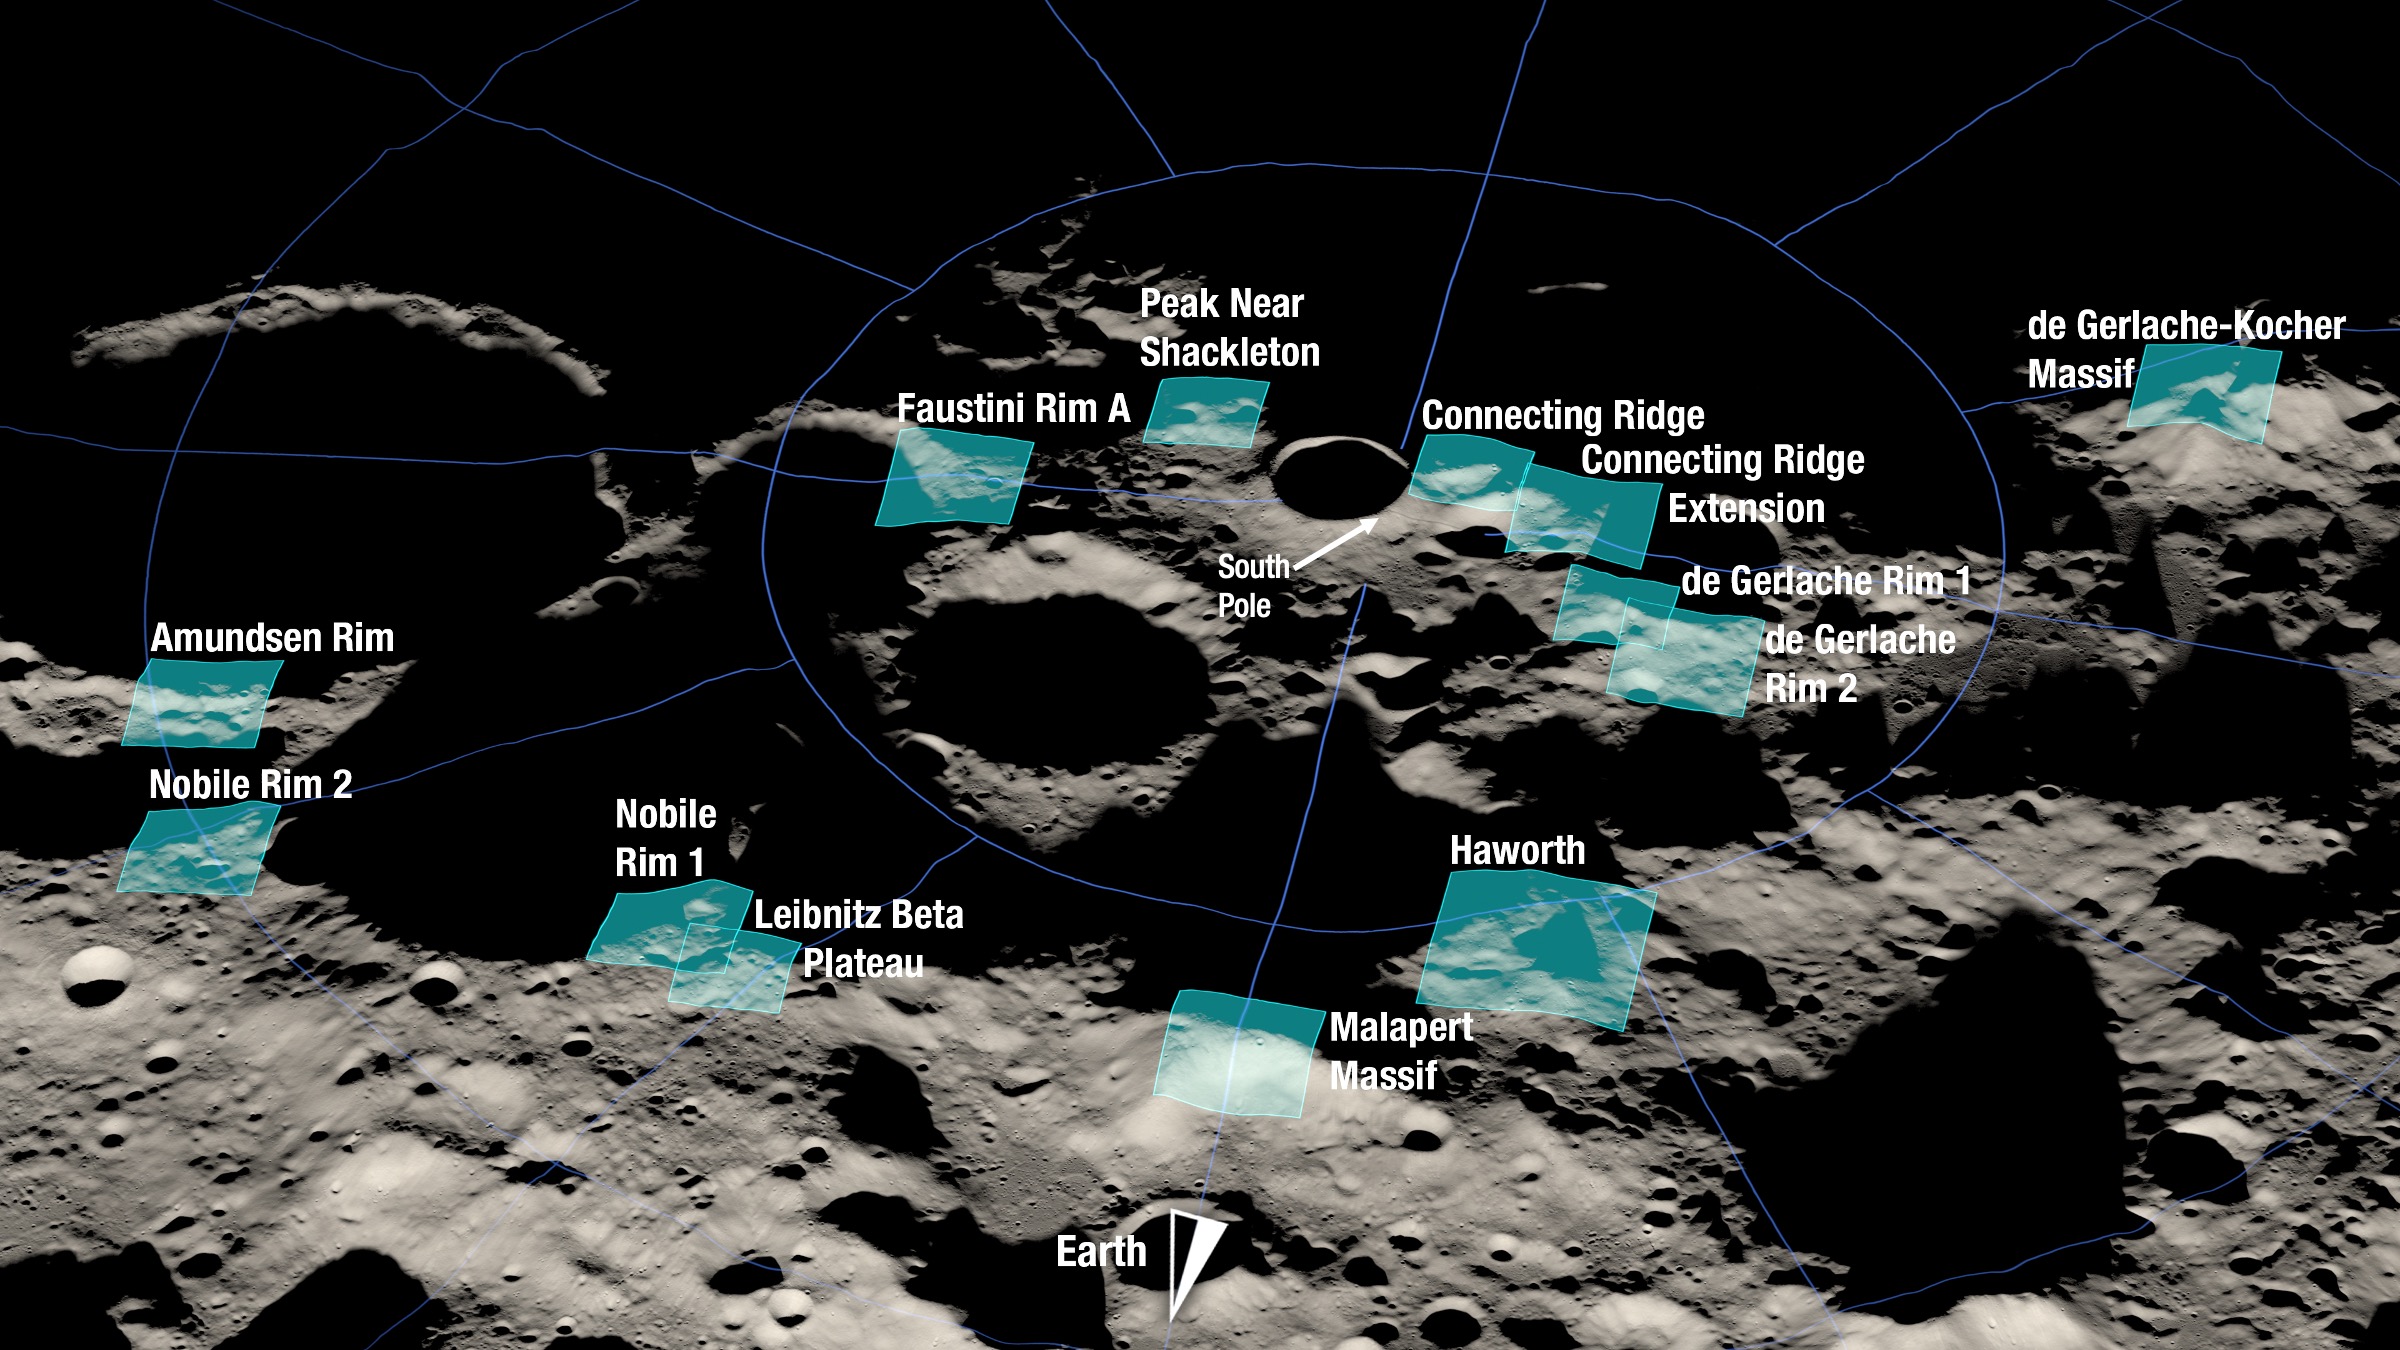 a map of the surface of the moon with 13 proposed landing sites